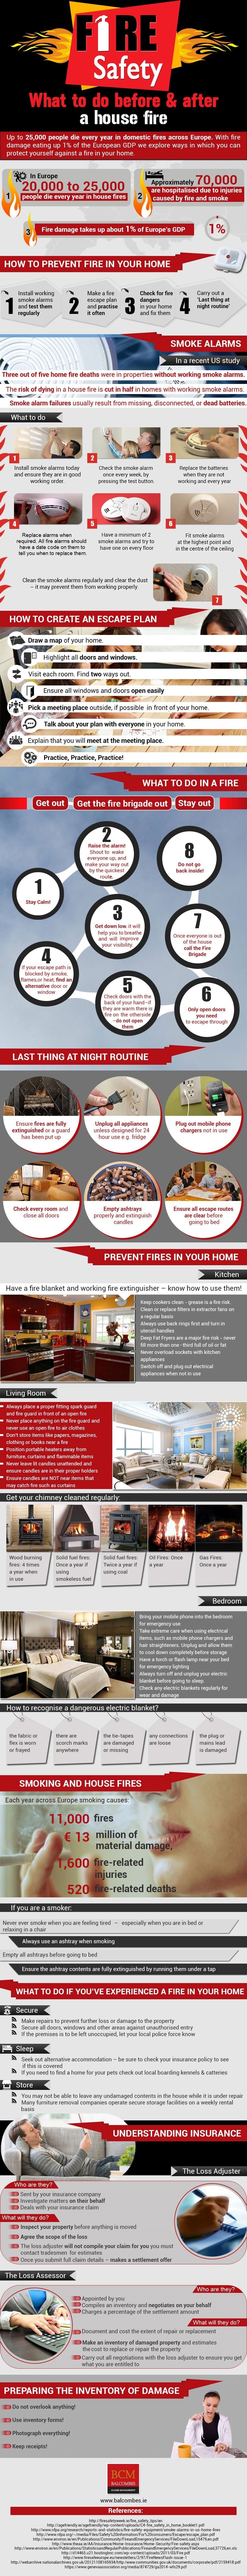 Fire-Safety-in-the-Home-infographic-1